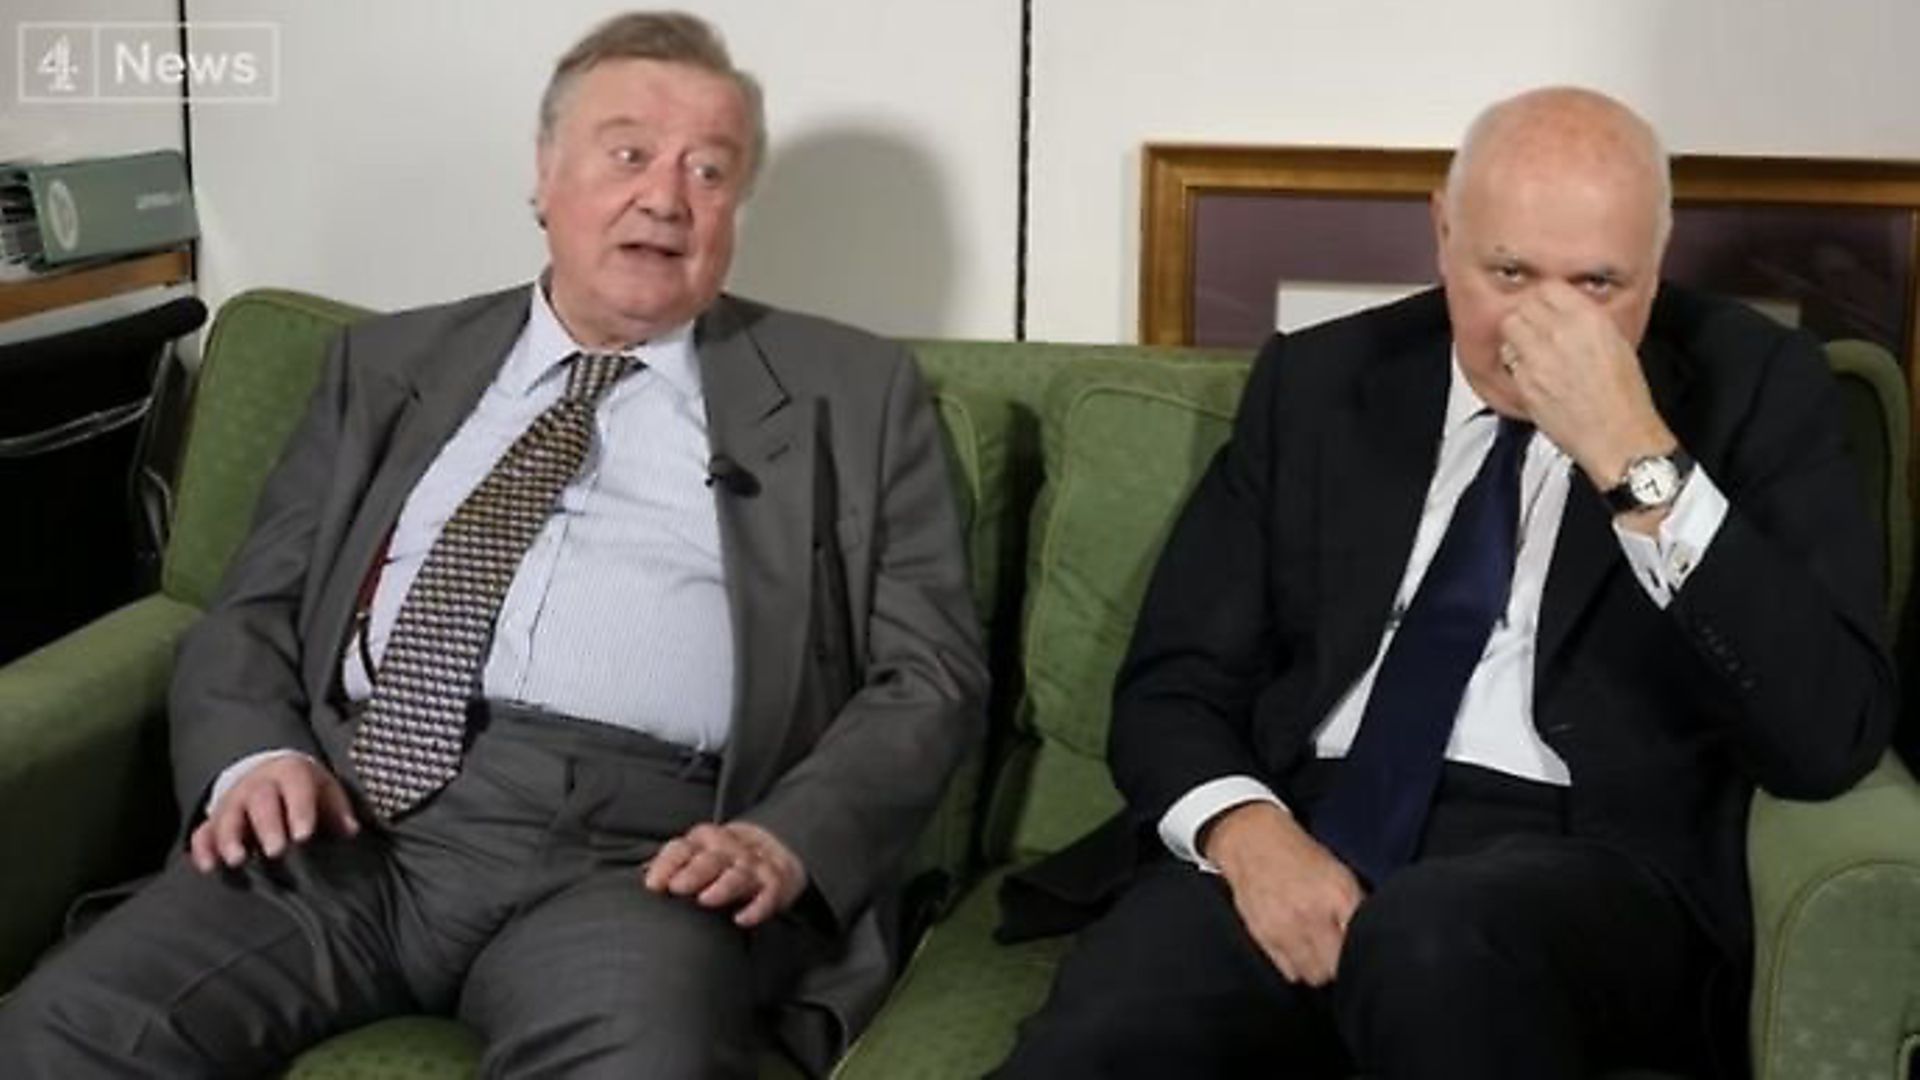 Ken Clarke and Iain Duncan-Smith appears on Channel 4 News. Photograph: Channel 4. - Credit: Archant